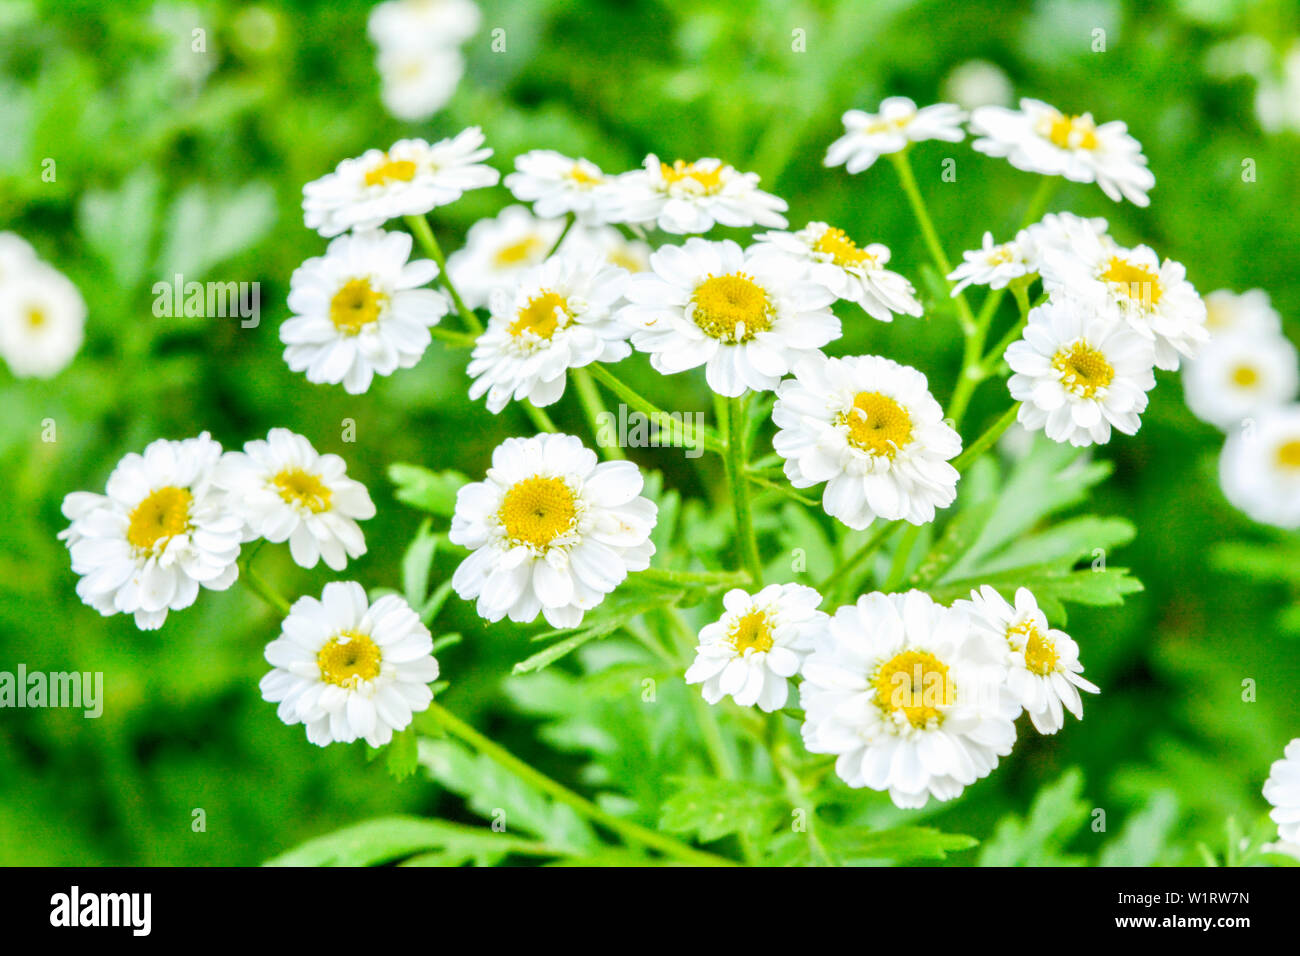 White and yellow flowers of Feverfew Pyrethrum or Tanacetum Corymbosum or Chrysanthemum Parthenium close-up with green grass background, selective foc Stock Photo